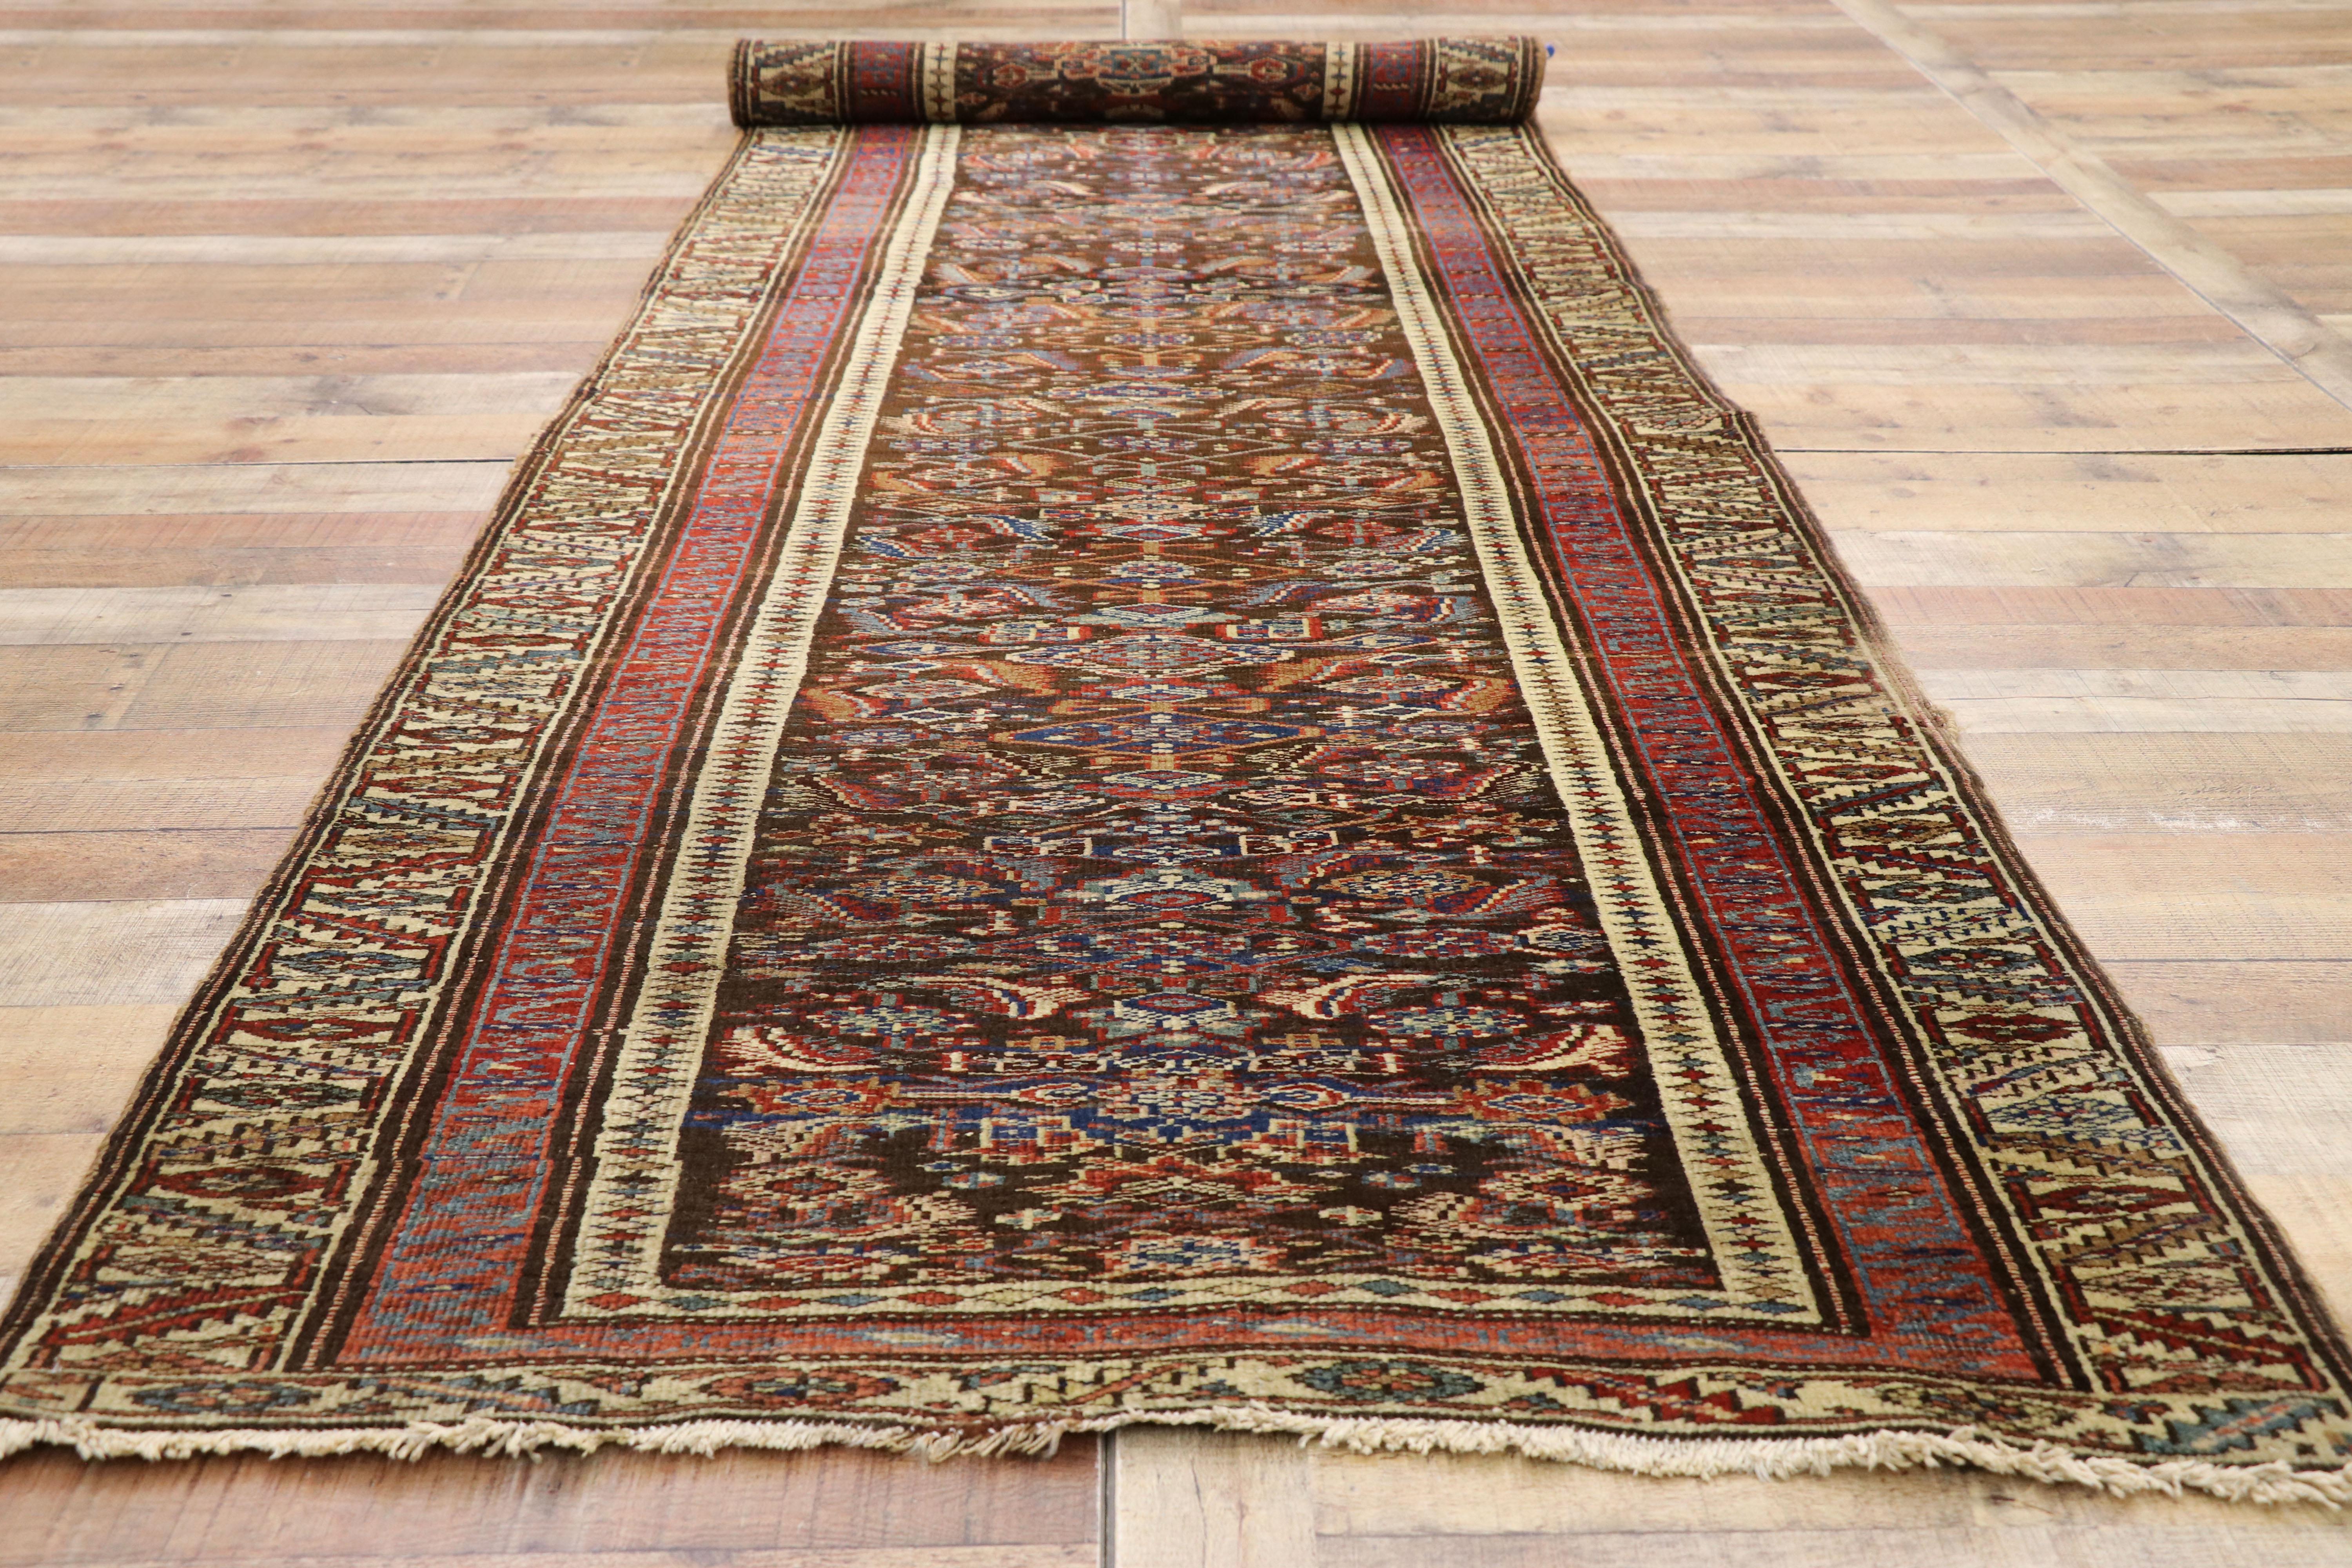 Aesthetic Movement Late 19th Century Antique Persian Bijar Runner, Tribal Style Hallway Runner For Sale